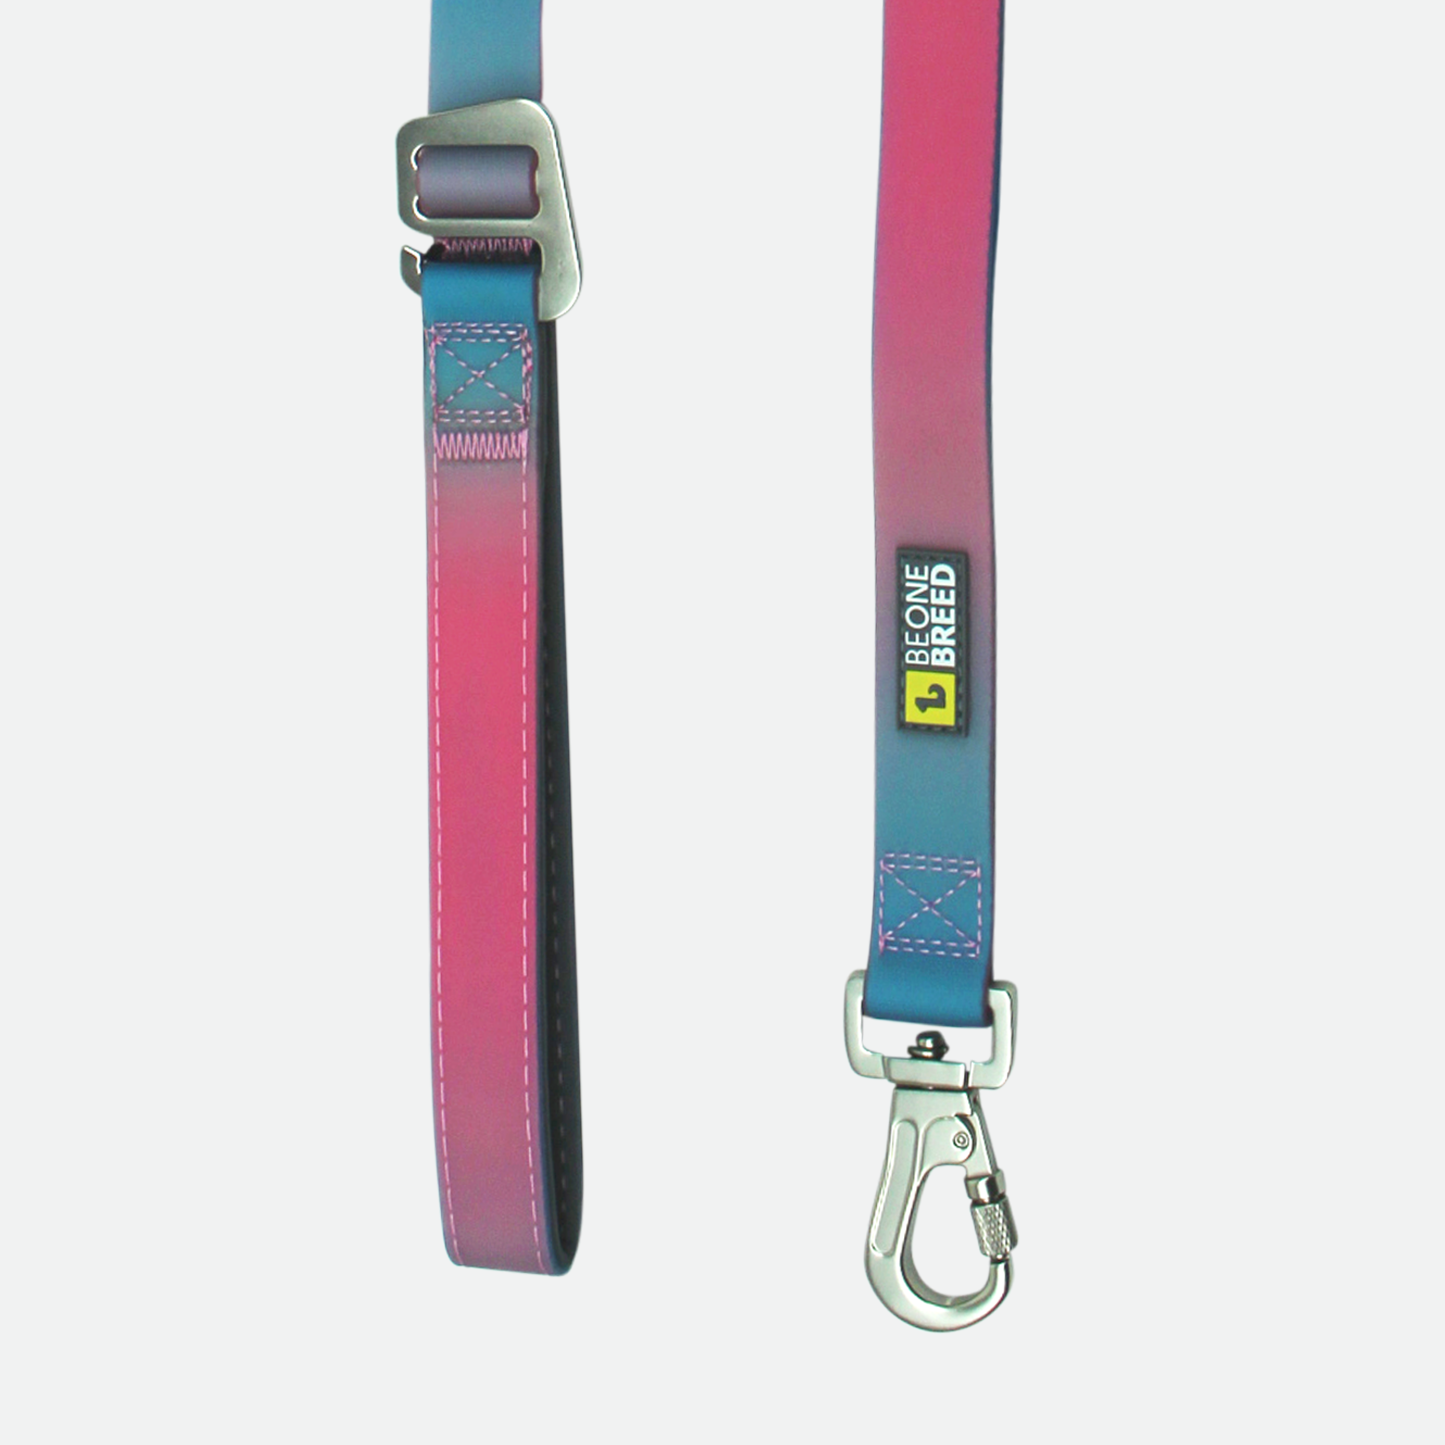 Silicone leash for dog, blue & pink style